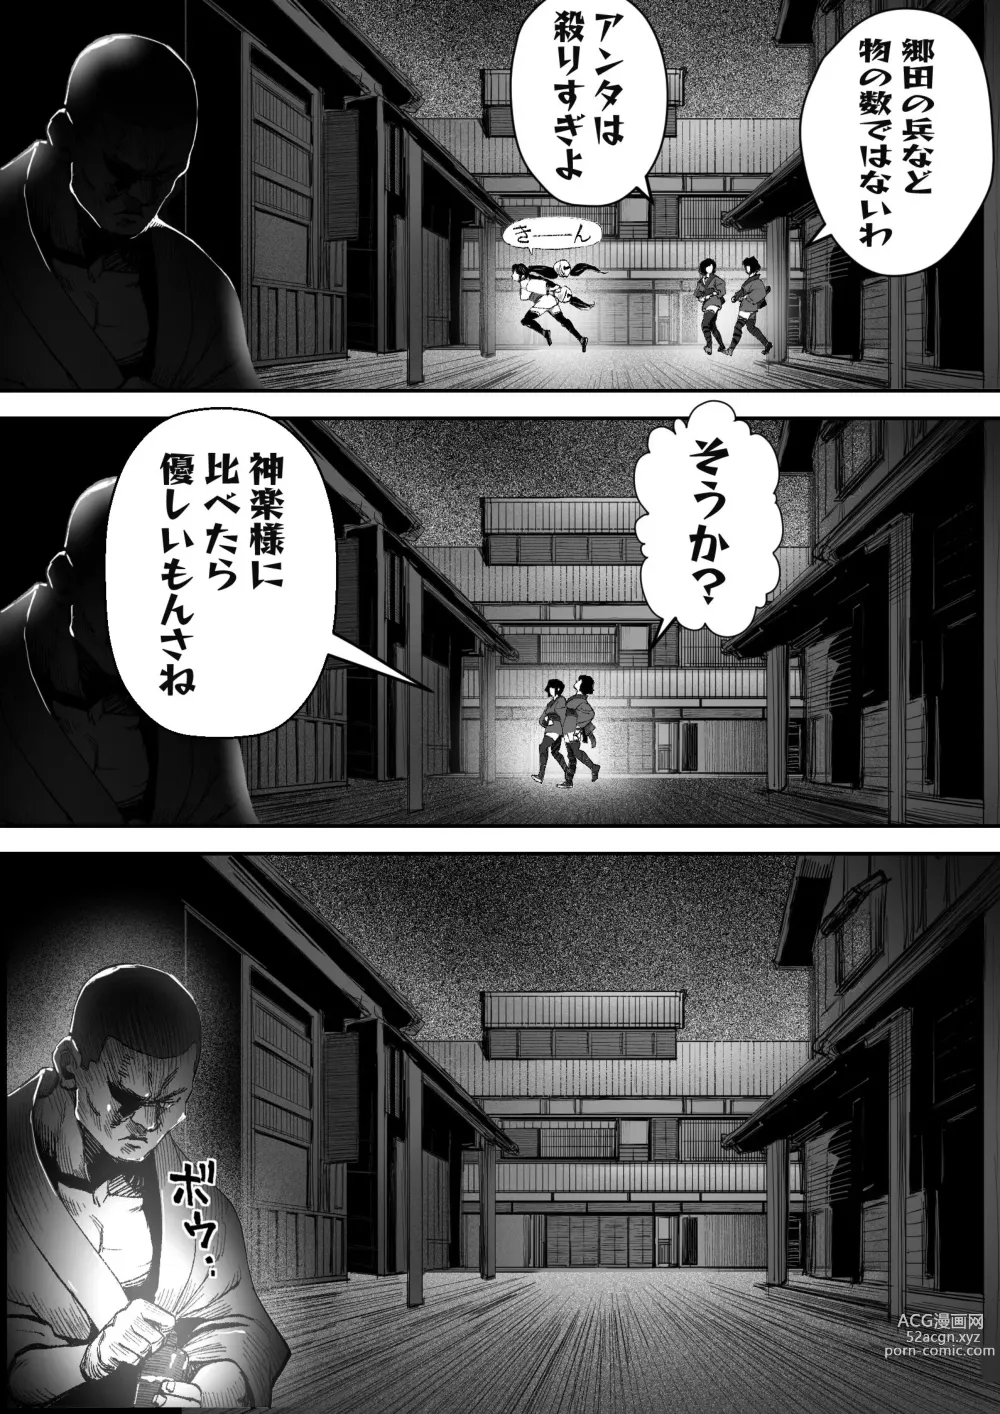 Page 5 of doujinshi 神楽必殺